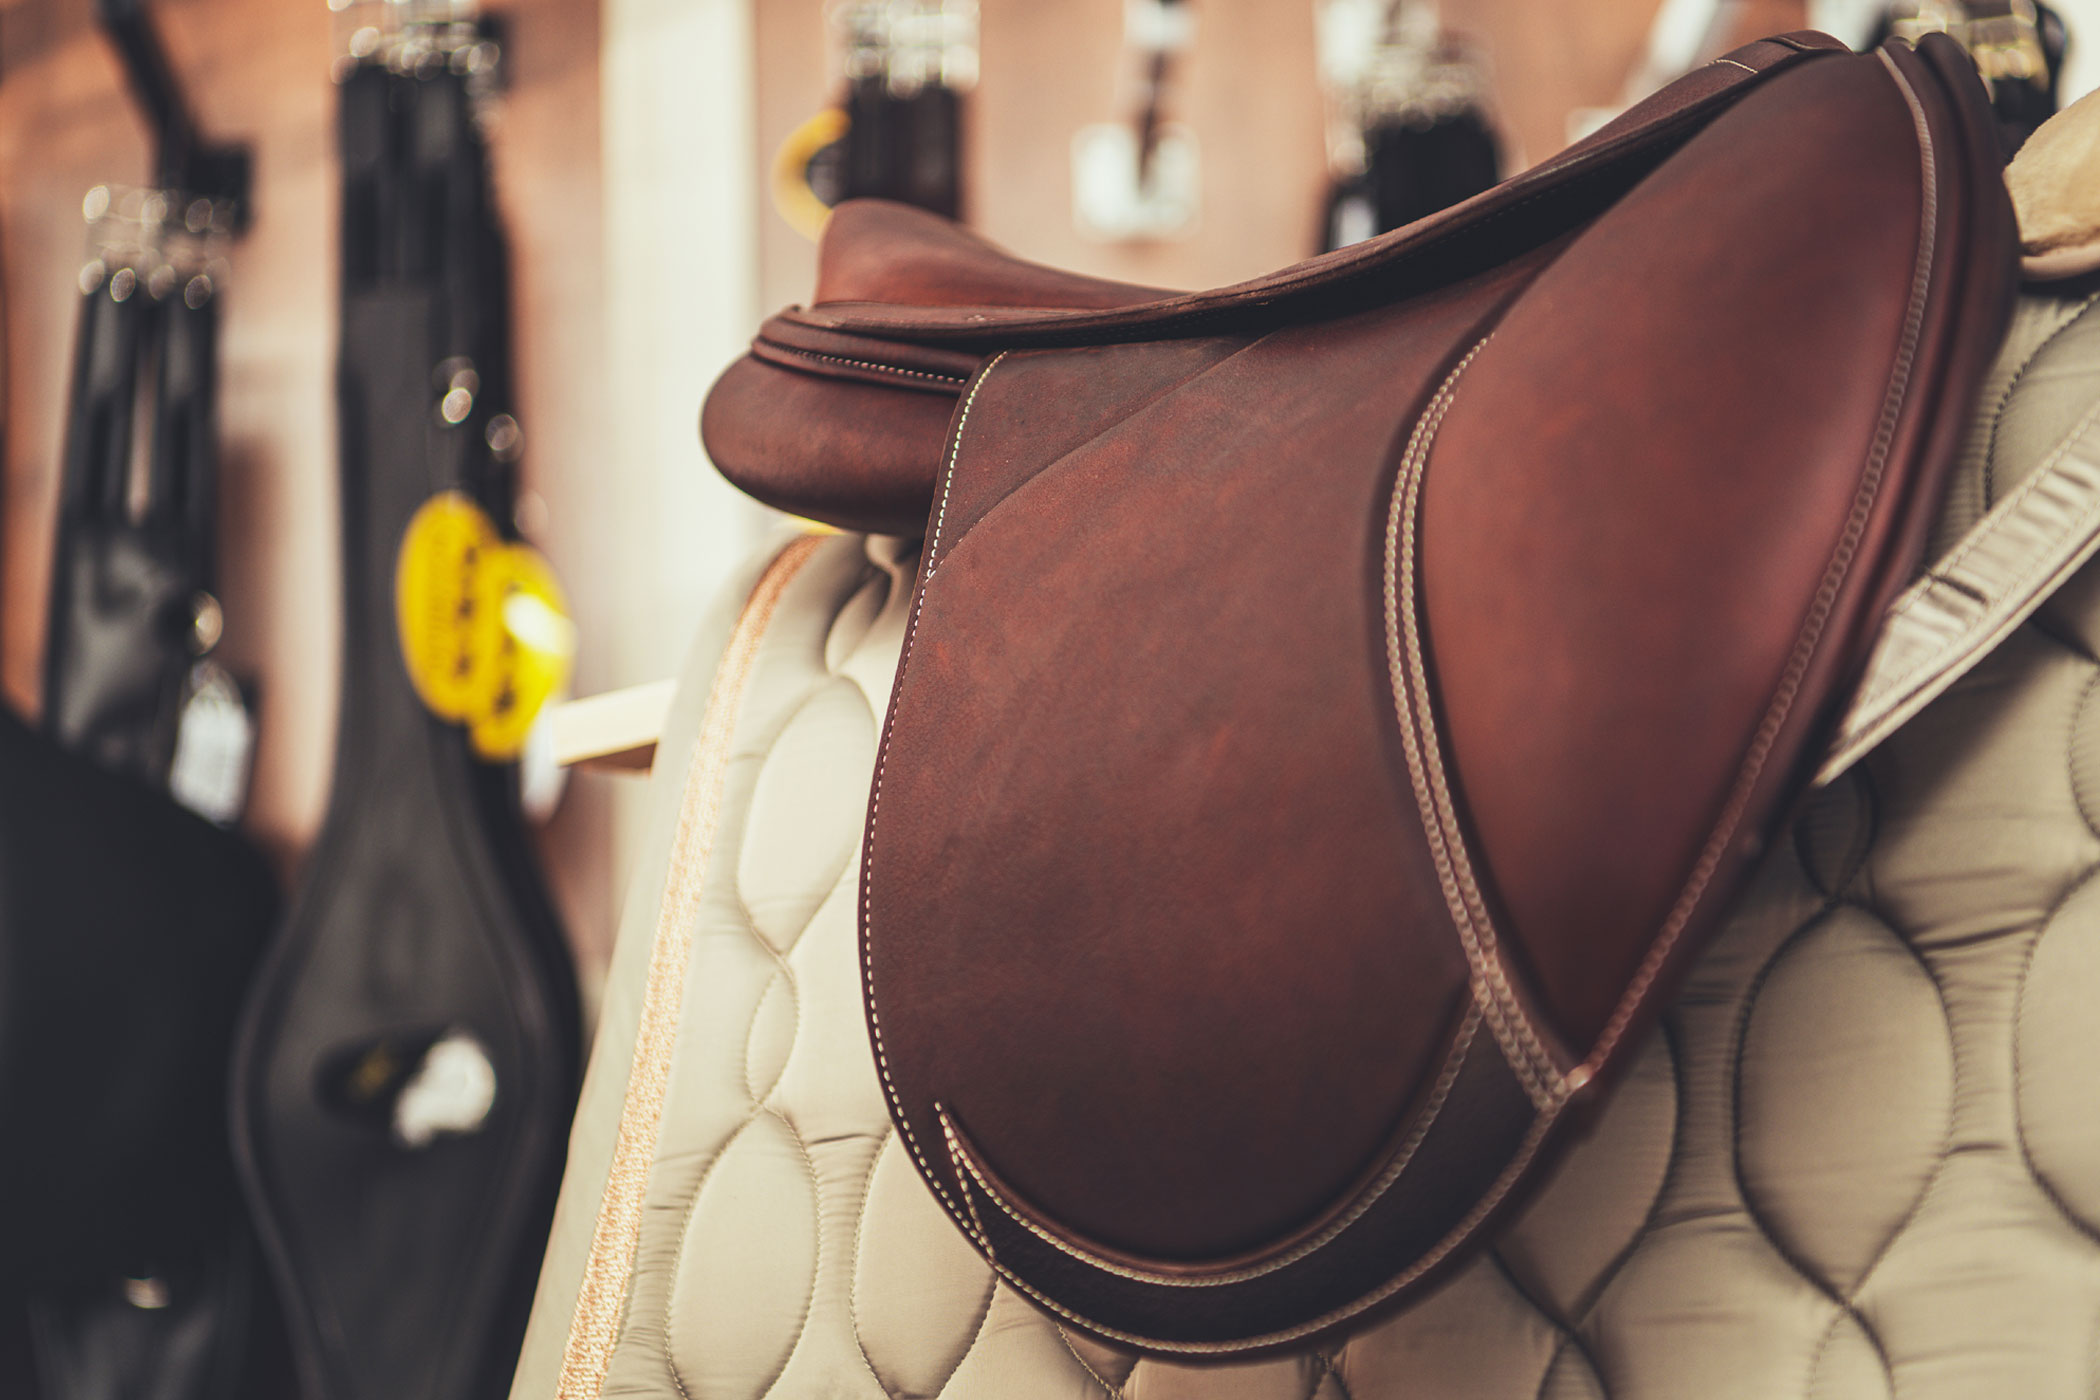 Maintaining and Organizing Your Tack Room